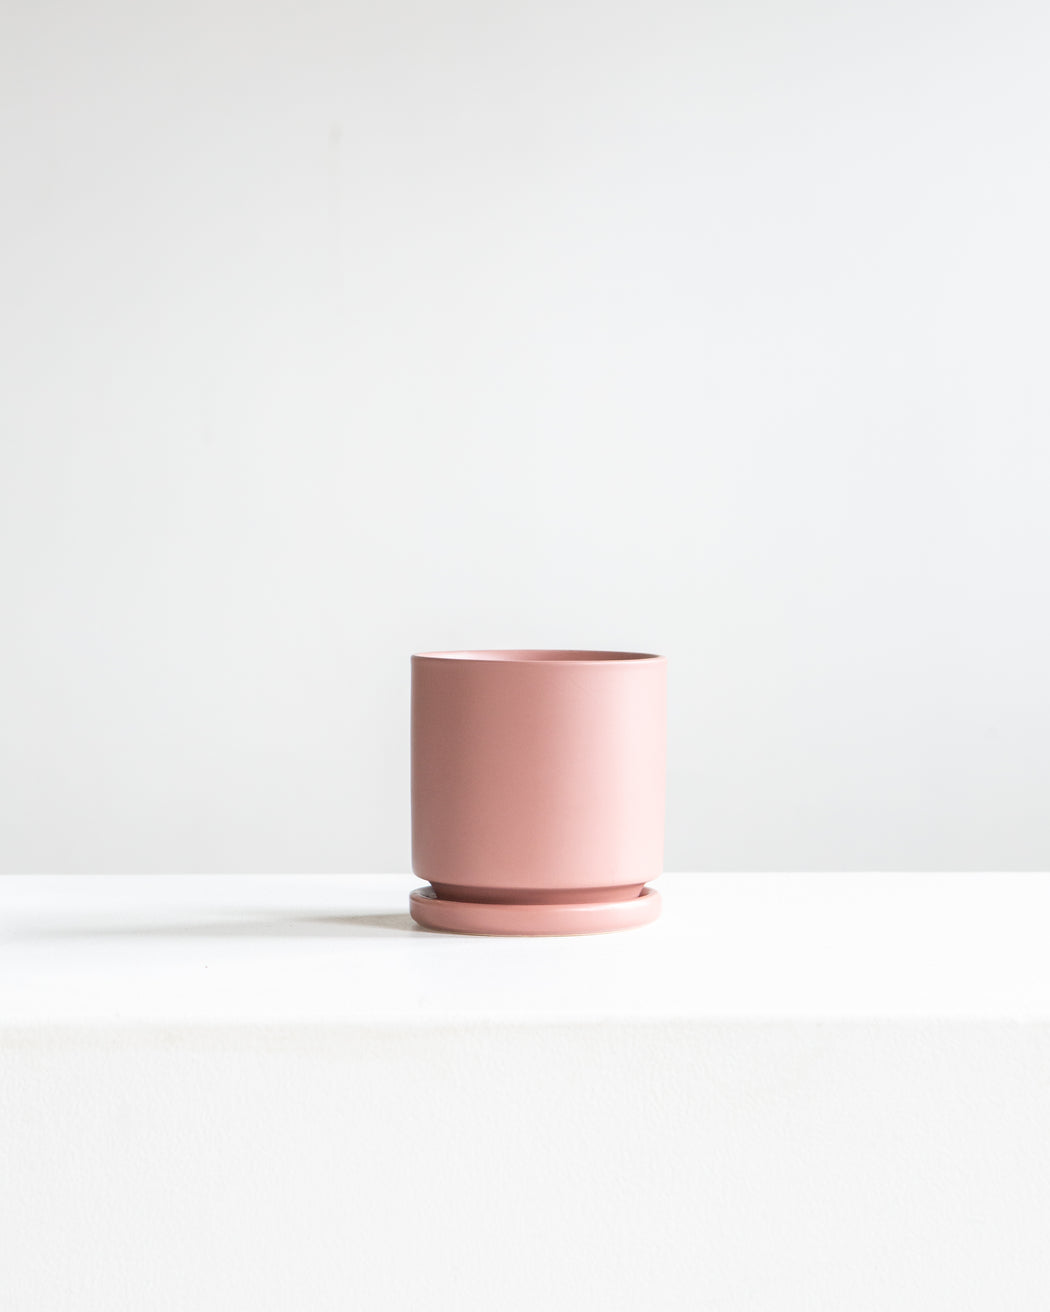 Small 4 Inch MOMMA POTS CYLINDER - DUSTY ROSE